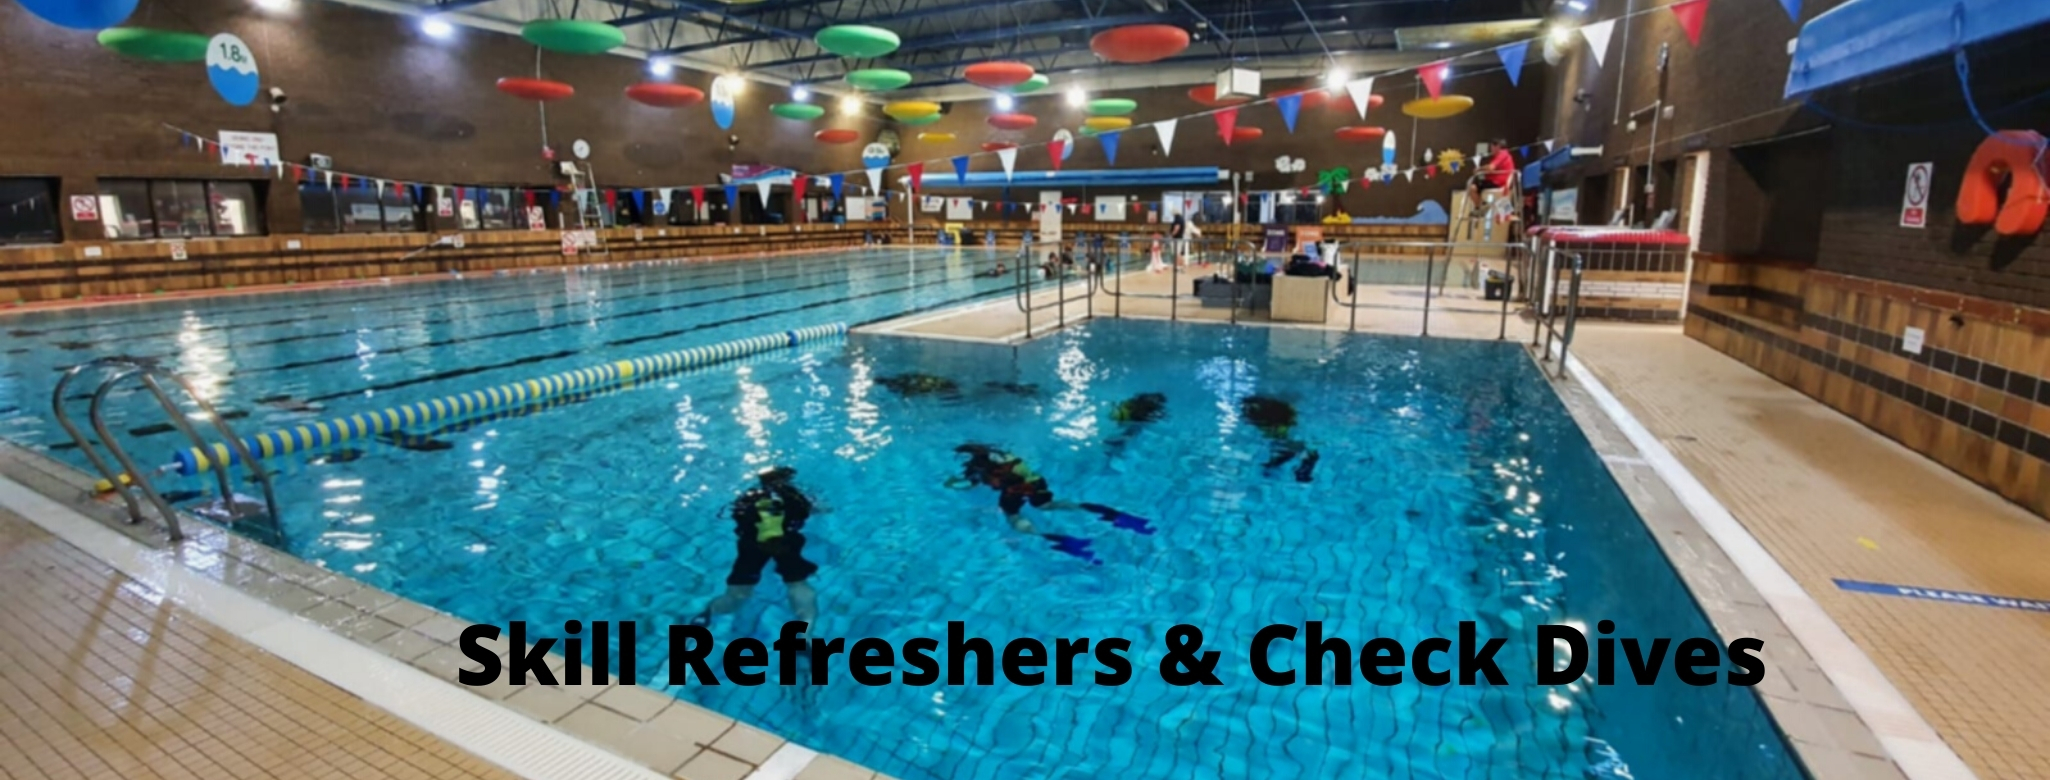 Diving Skill Refreshers & Check Dives